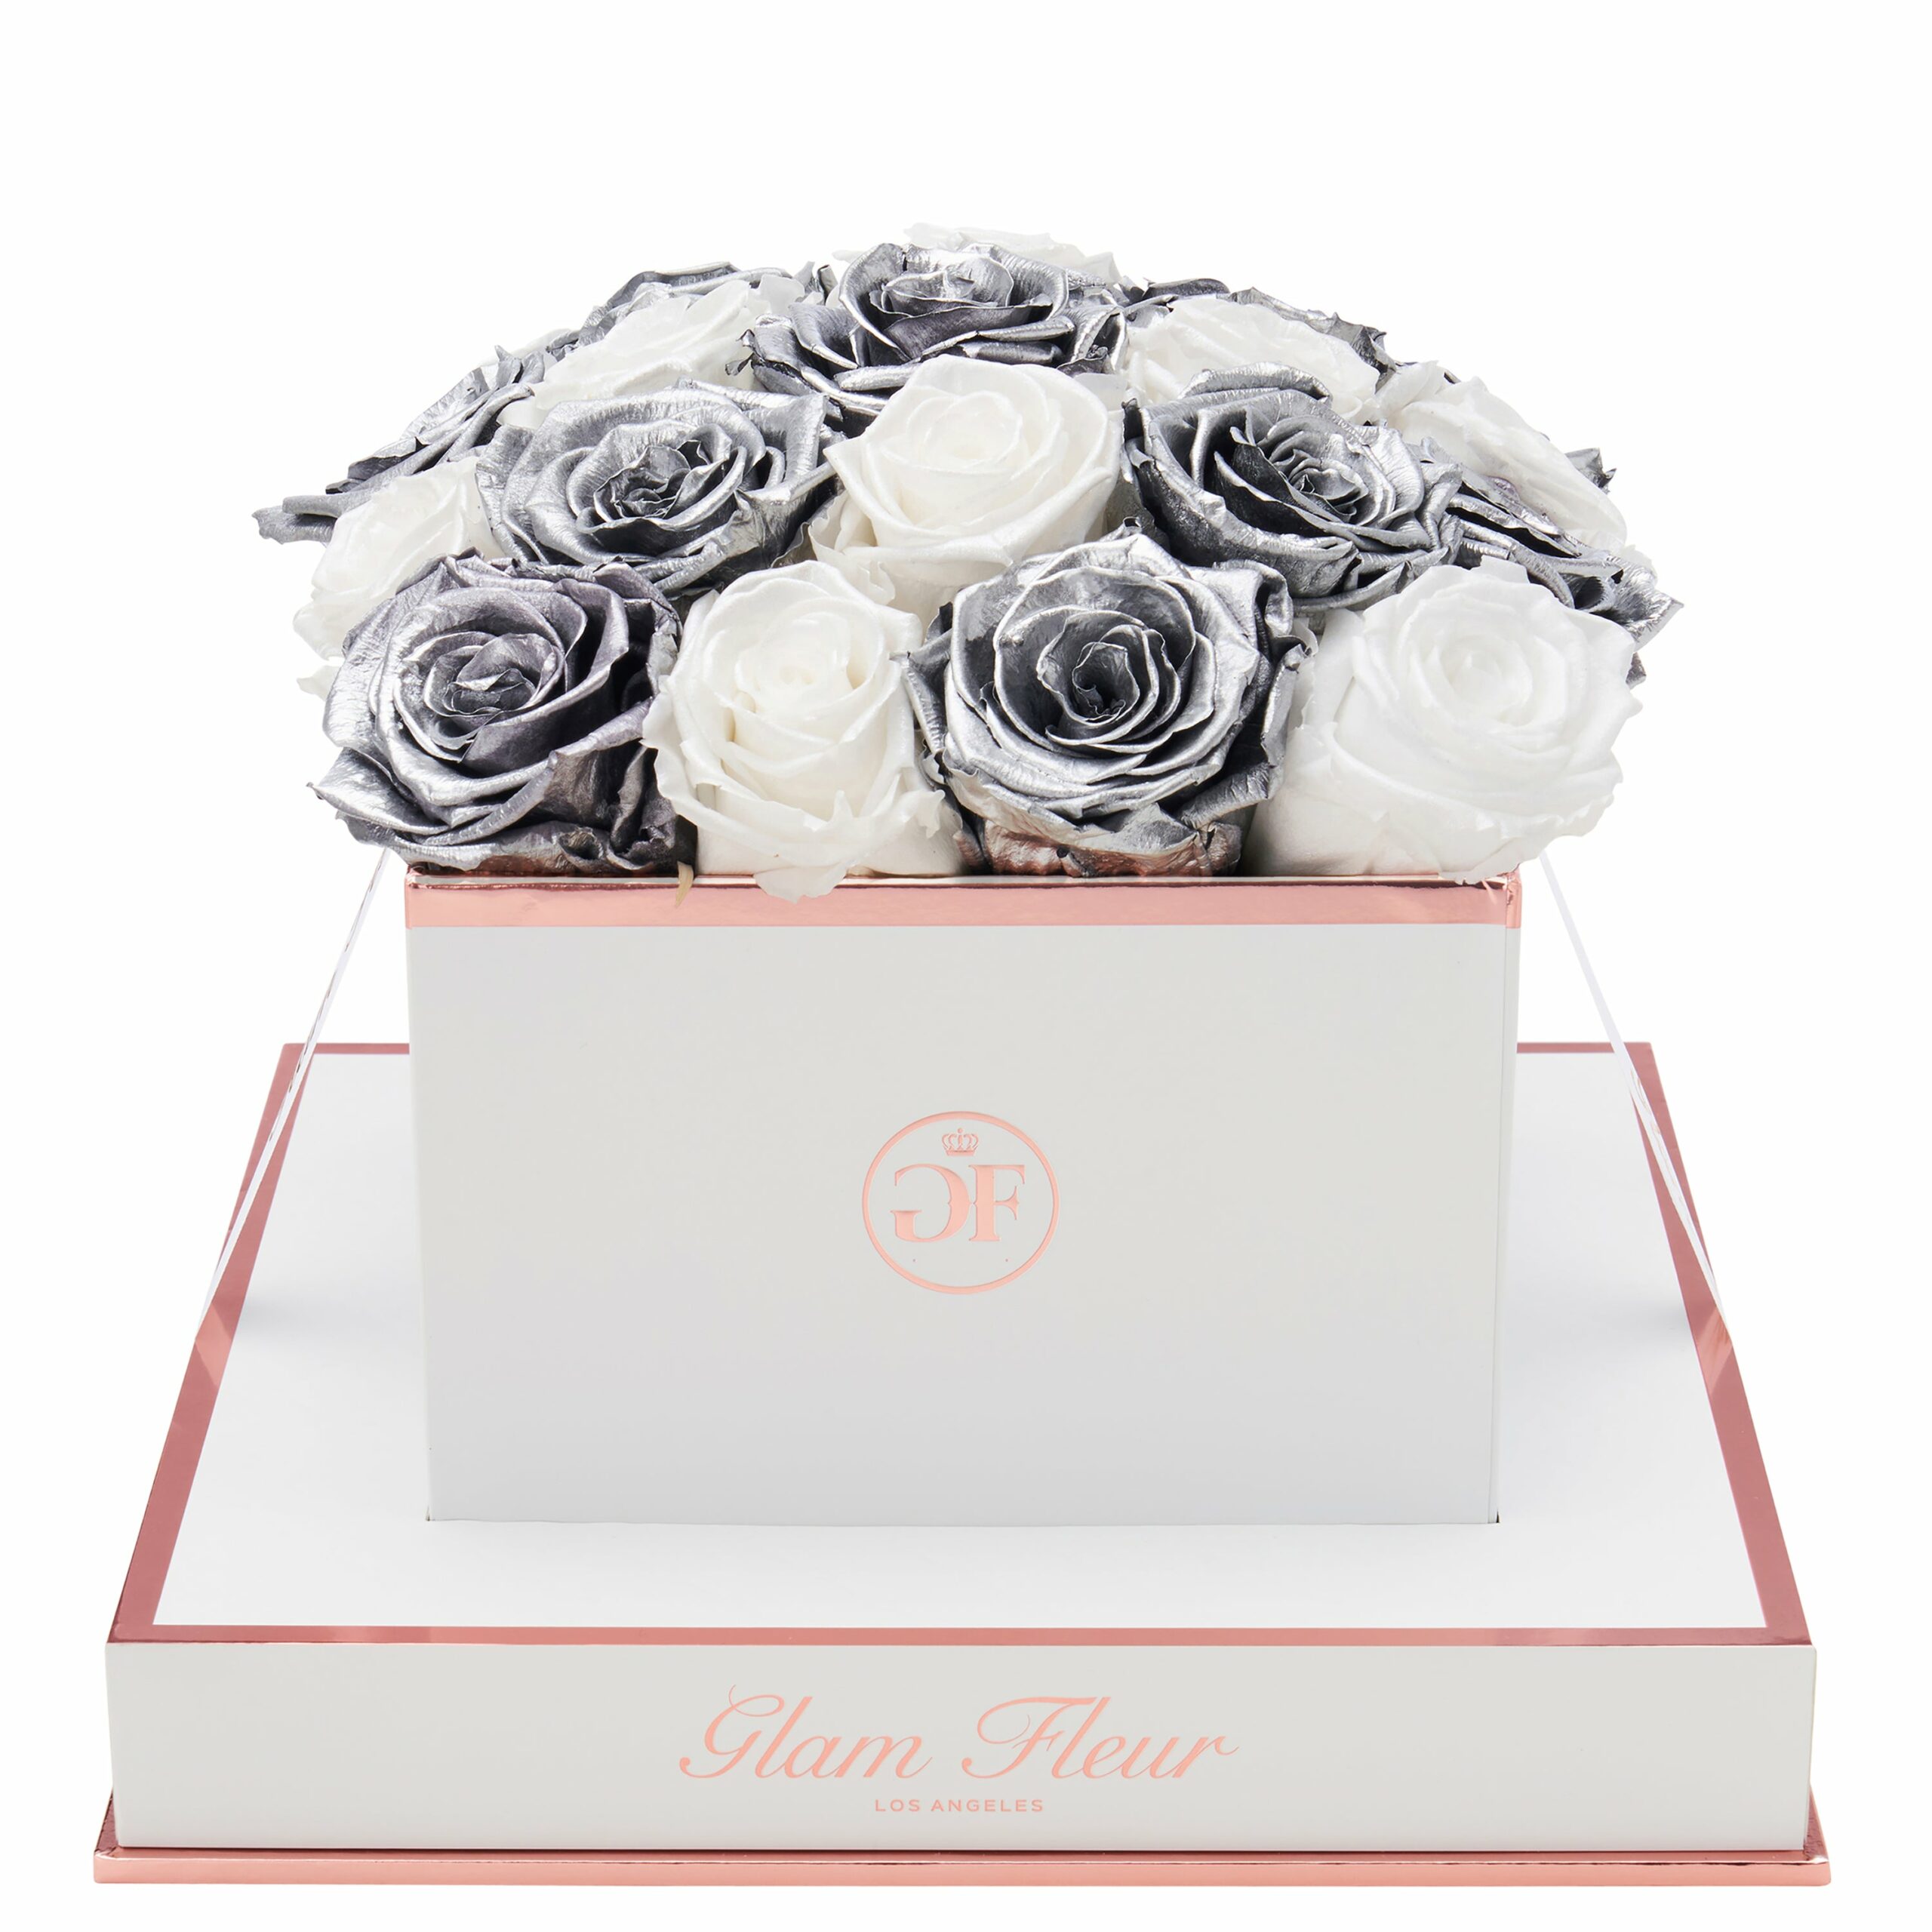 Metallic Silver and Glow White Rose Bouquet